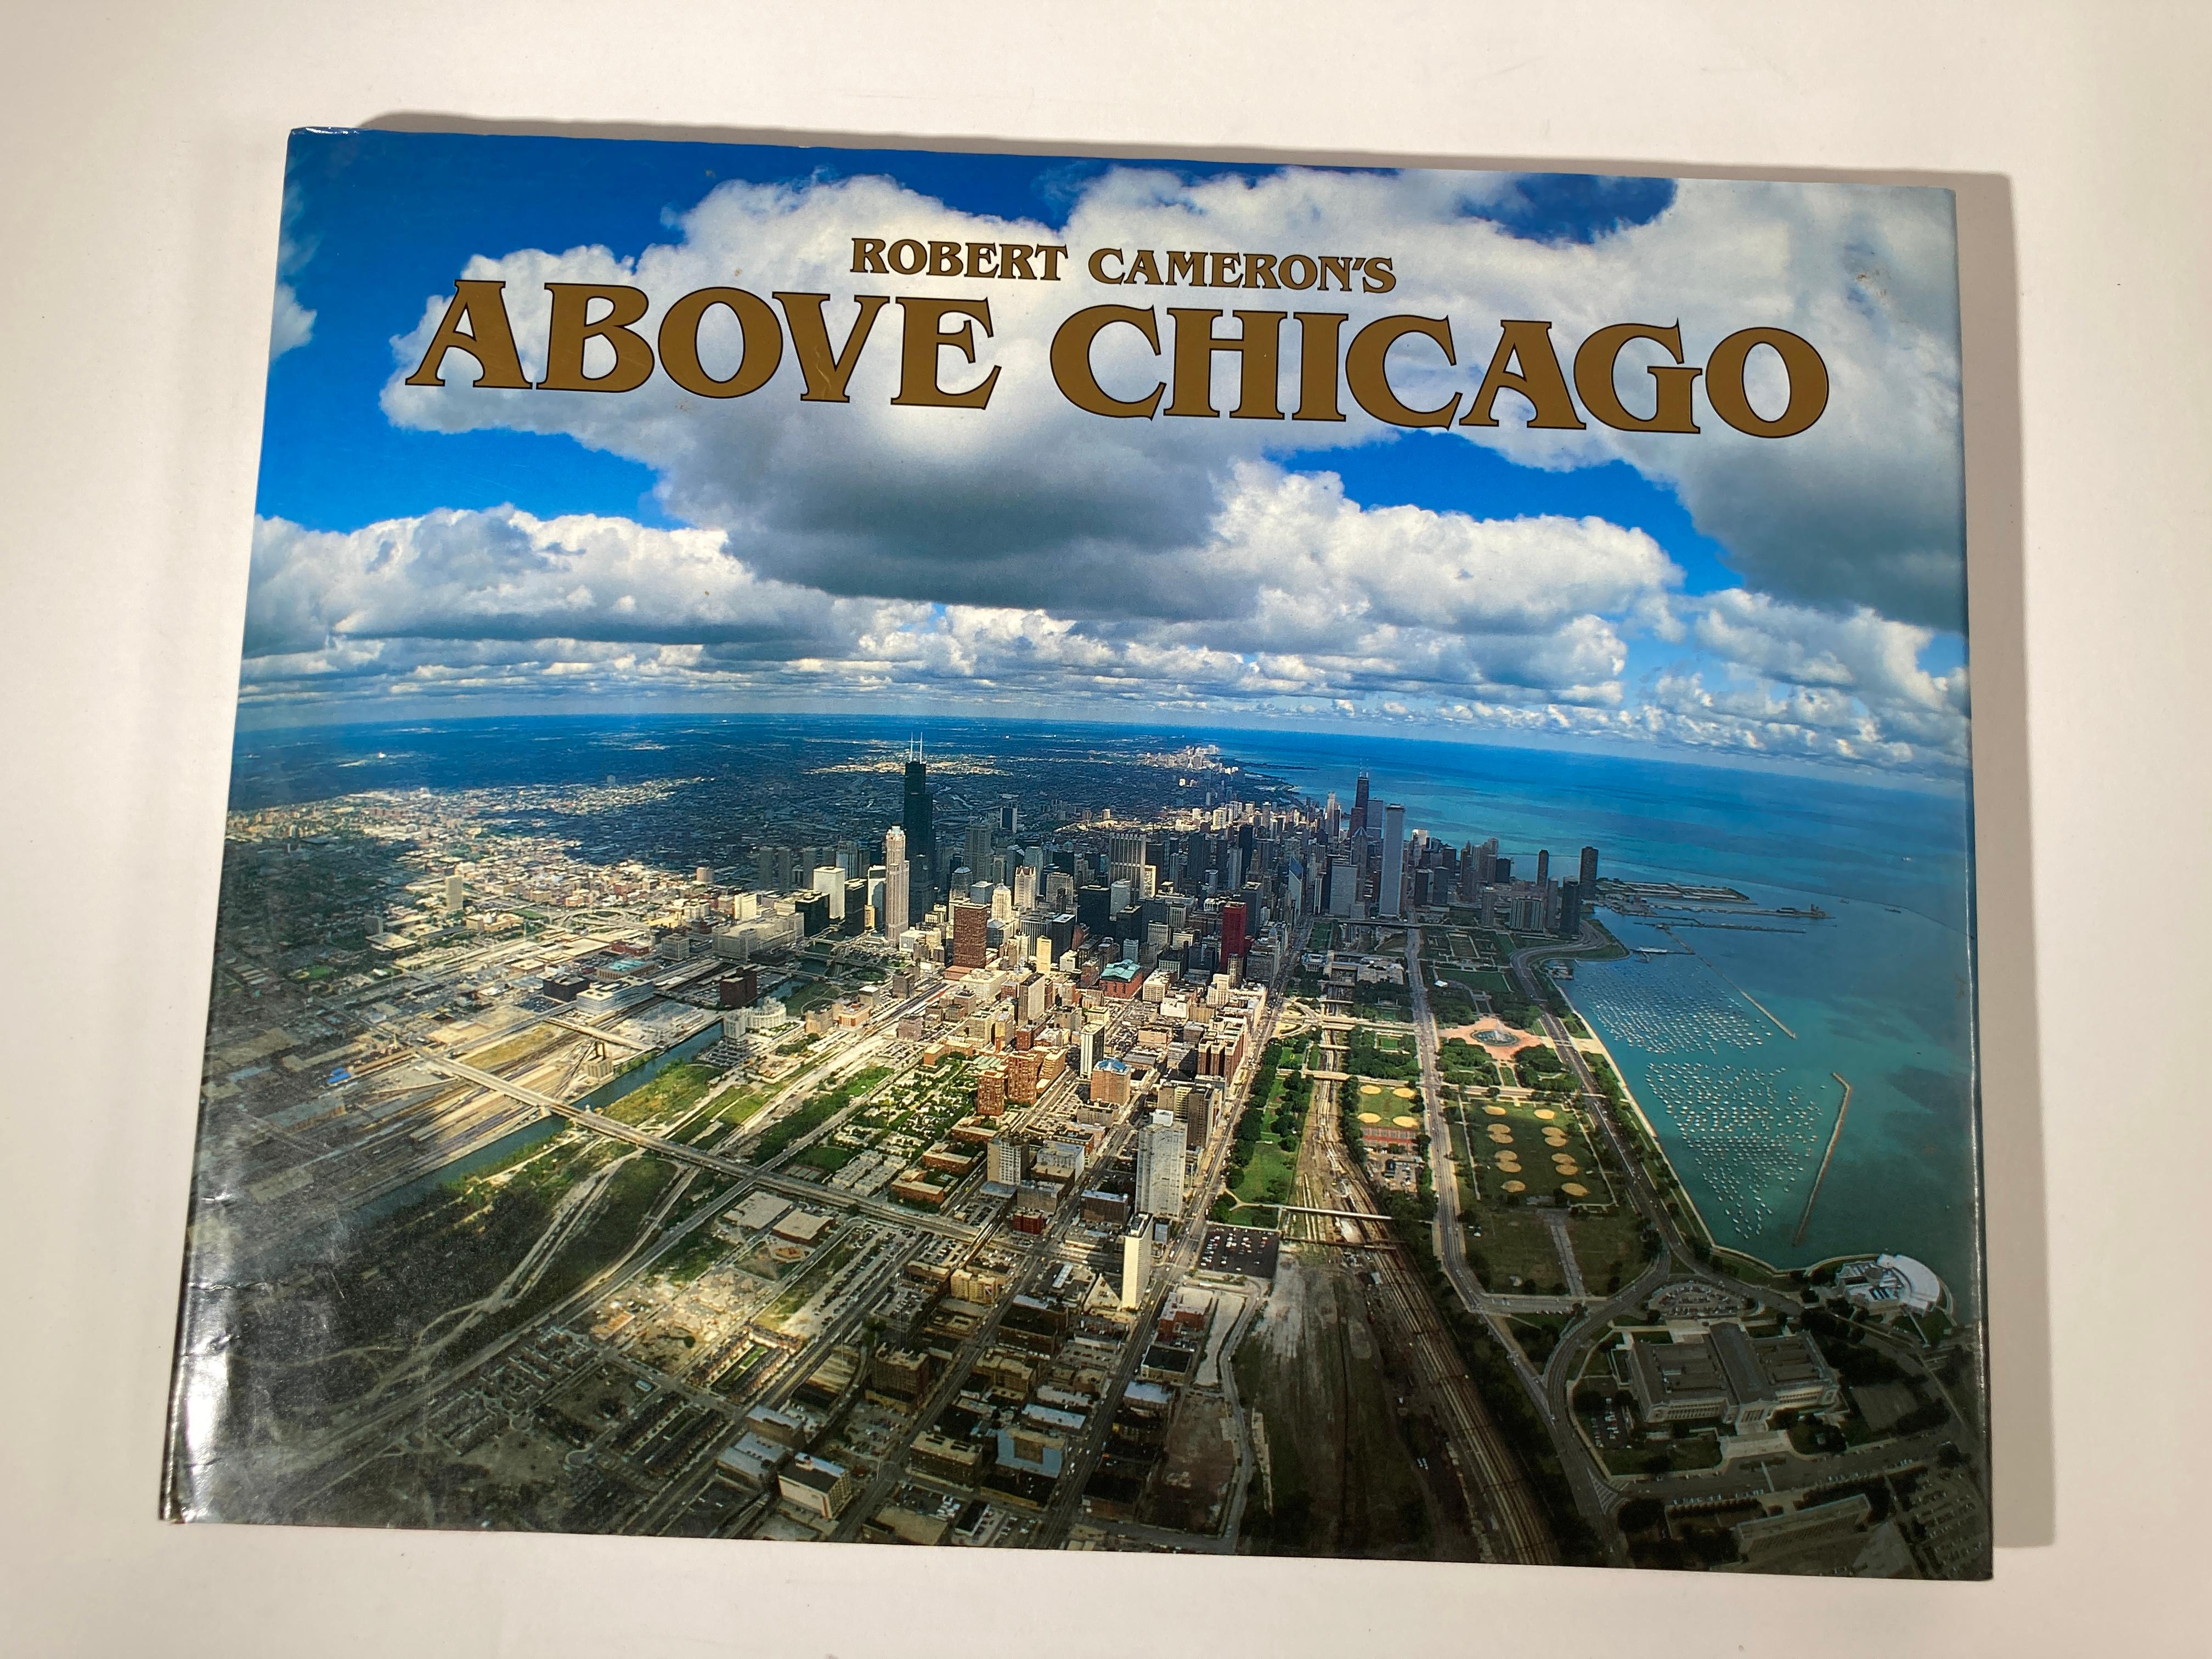 ABOVE CHICAGO. A New Collection of Historical and Original Aerial Photographs of Chicago.
Above Chicago book by Robert Cameron Hardcover Book. Robert Cameron, Tim Samuelson, Cheryl Kent Cameron, 1992 - Photography - 159 pages The newest Above